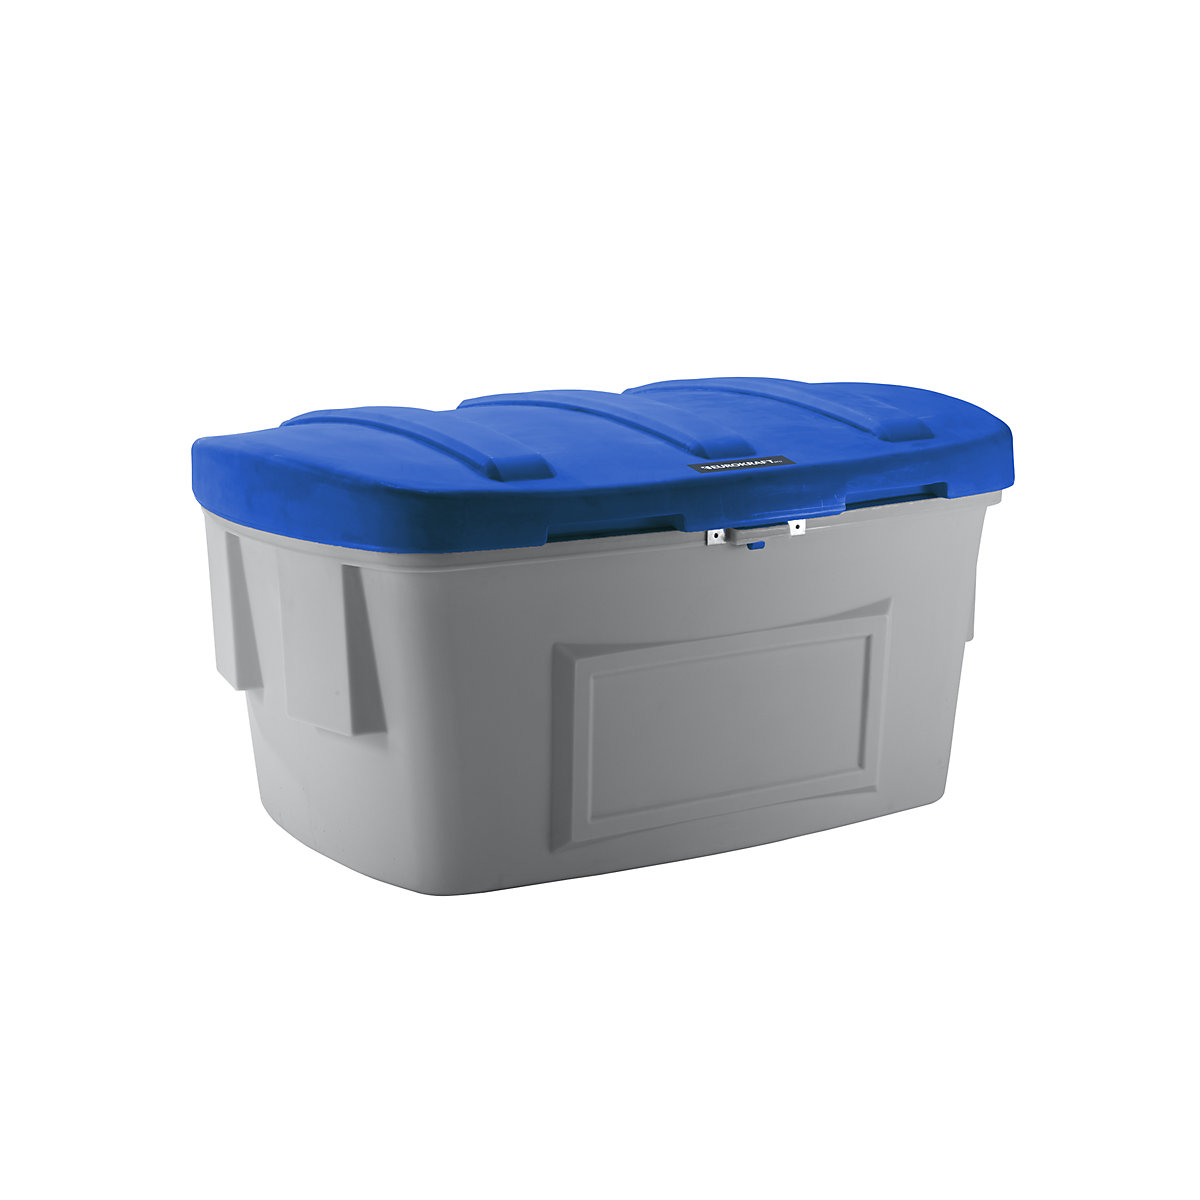 Universal / grit container – eurokraft pro, without dispenser opening, 1000 l, blue lid-13